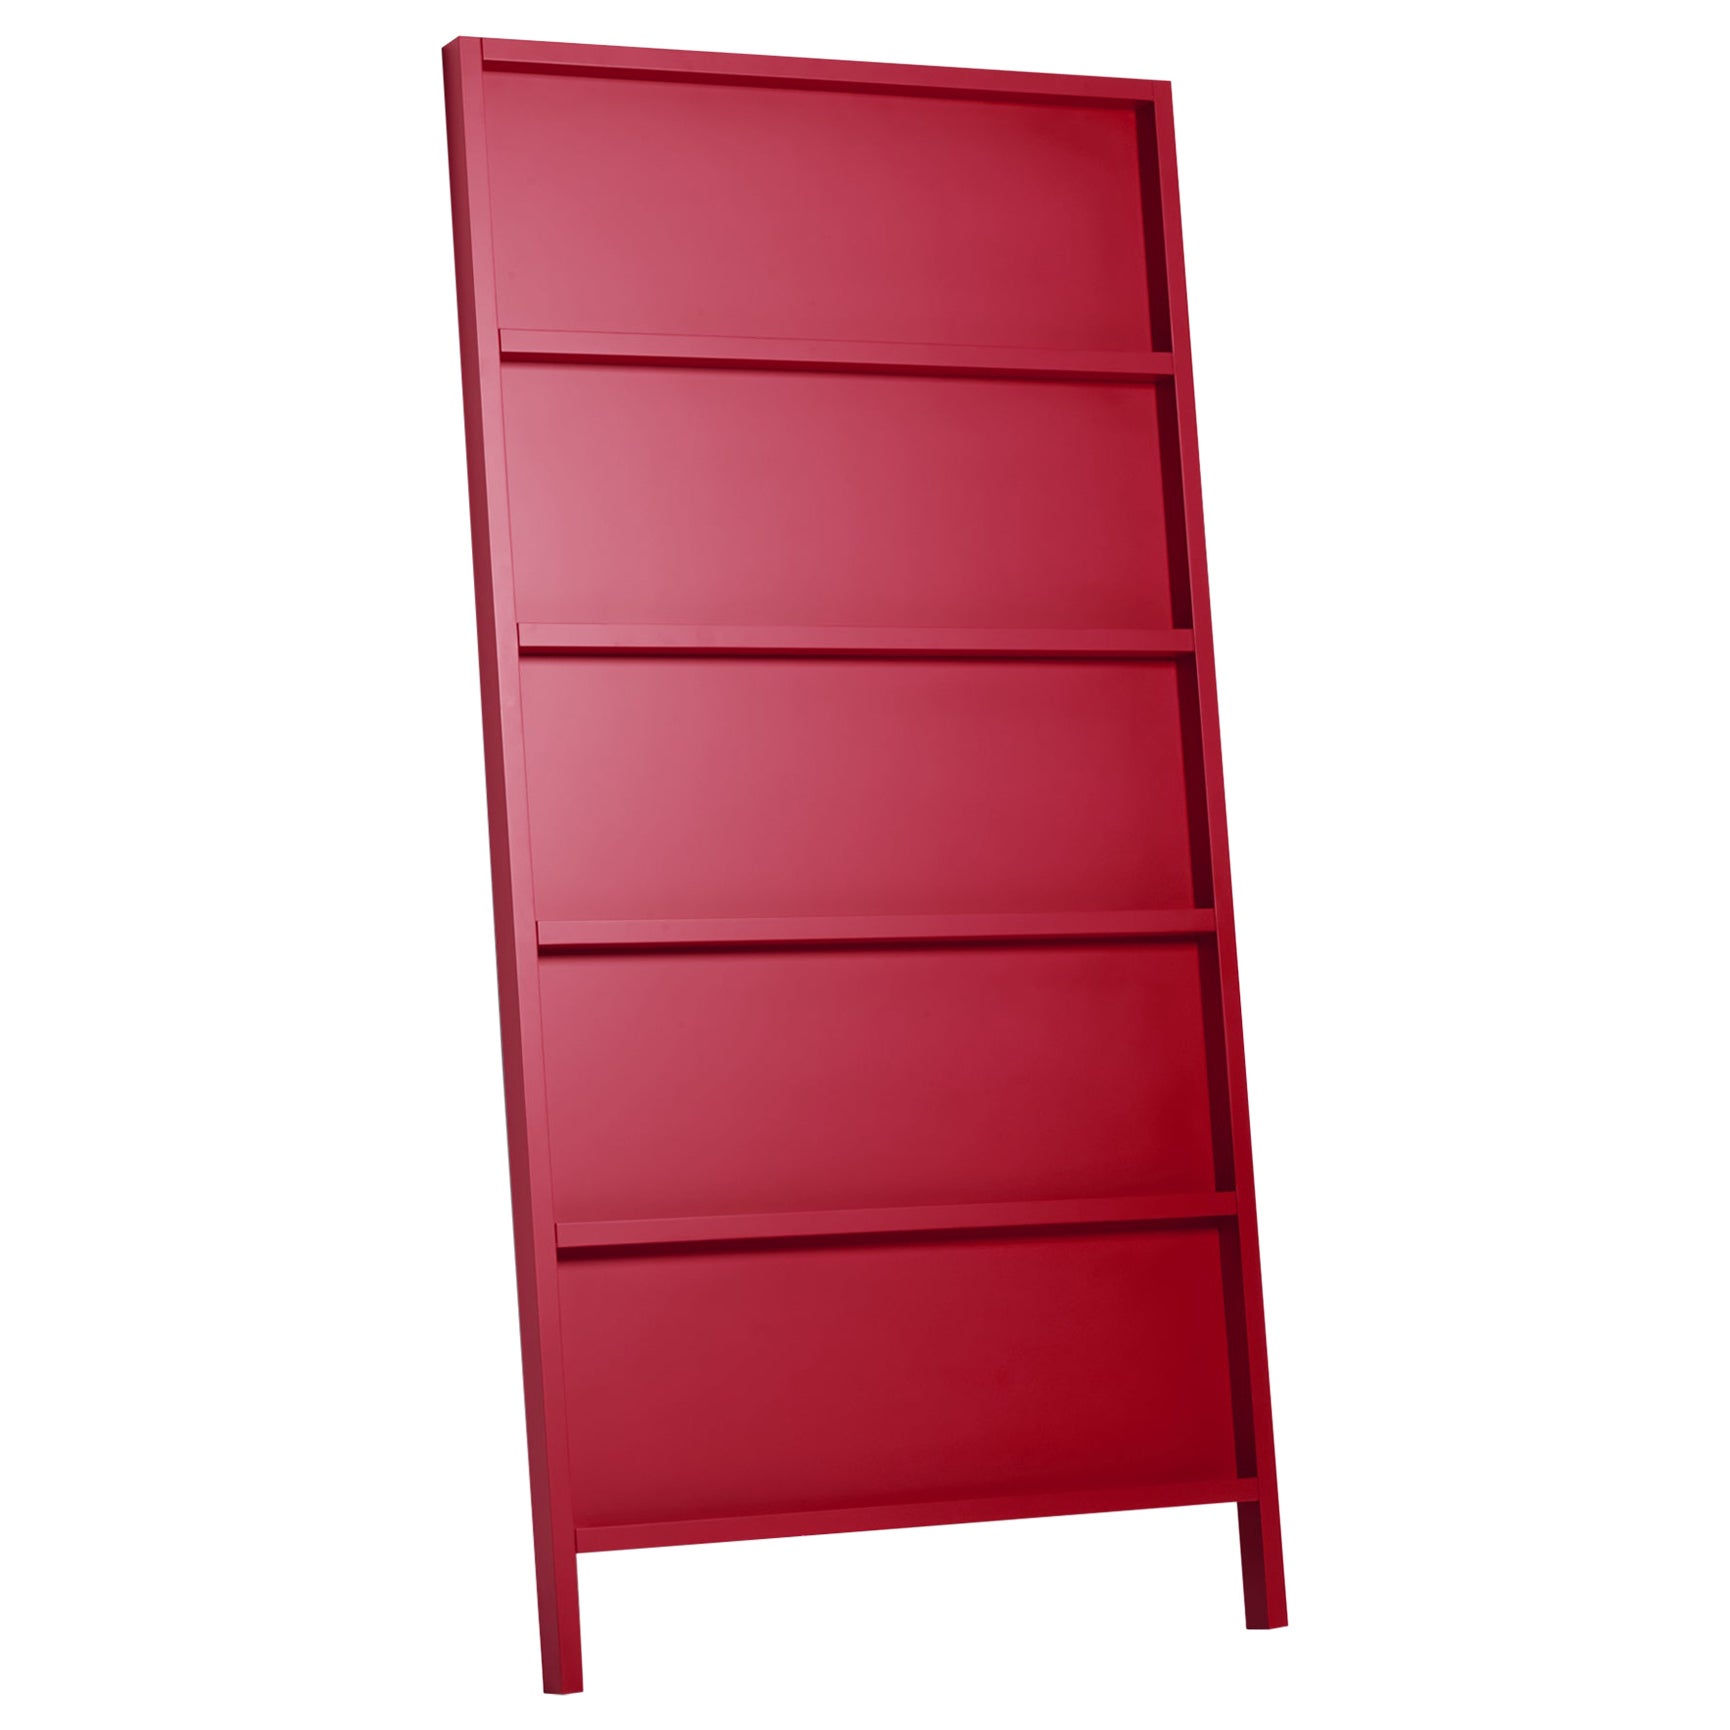 Moooi Oblique Small Cupboard/Wall Shelf in Ruby Red Lacquered Beech